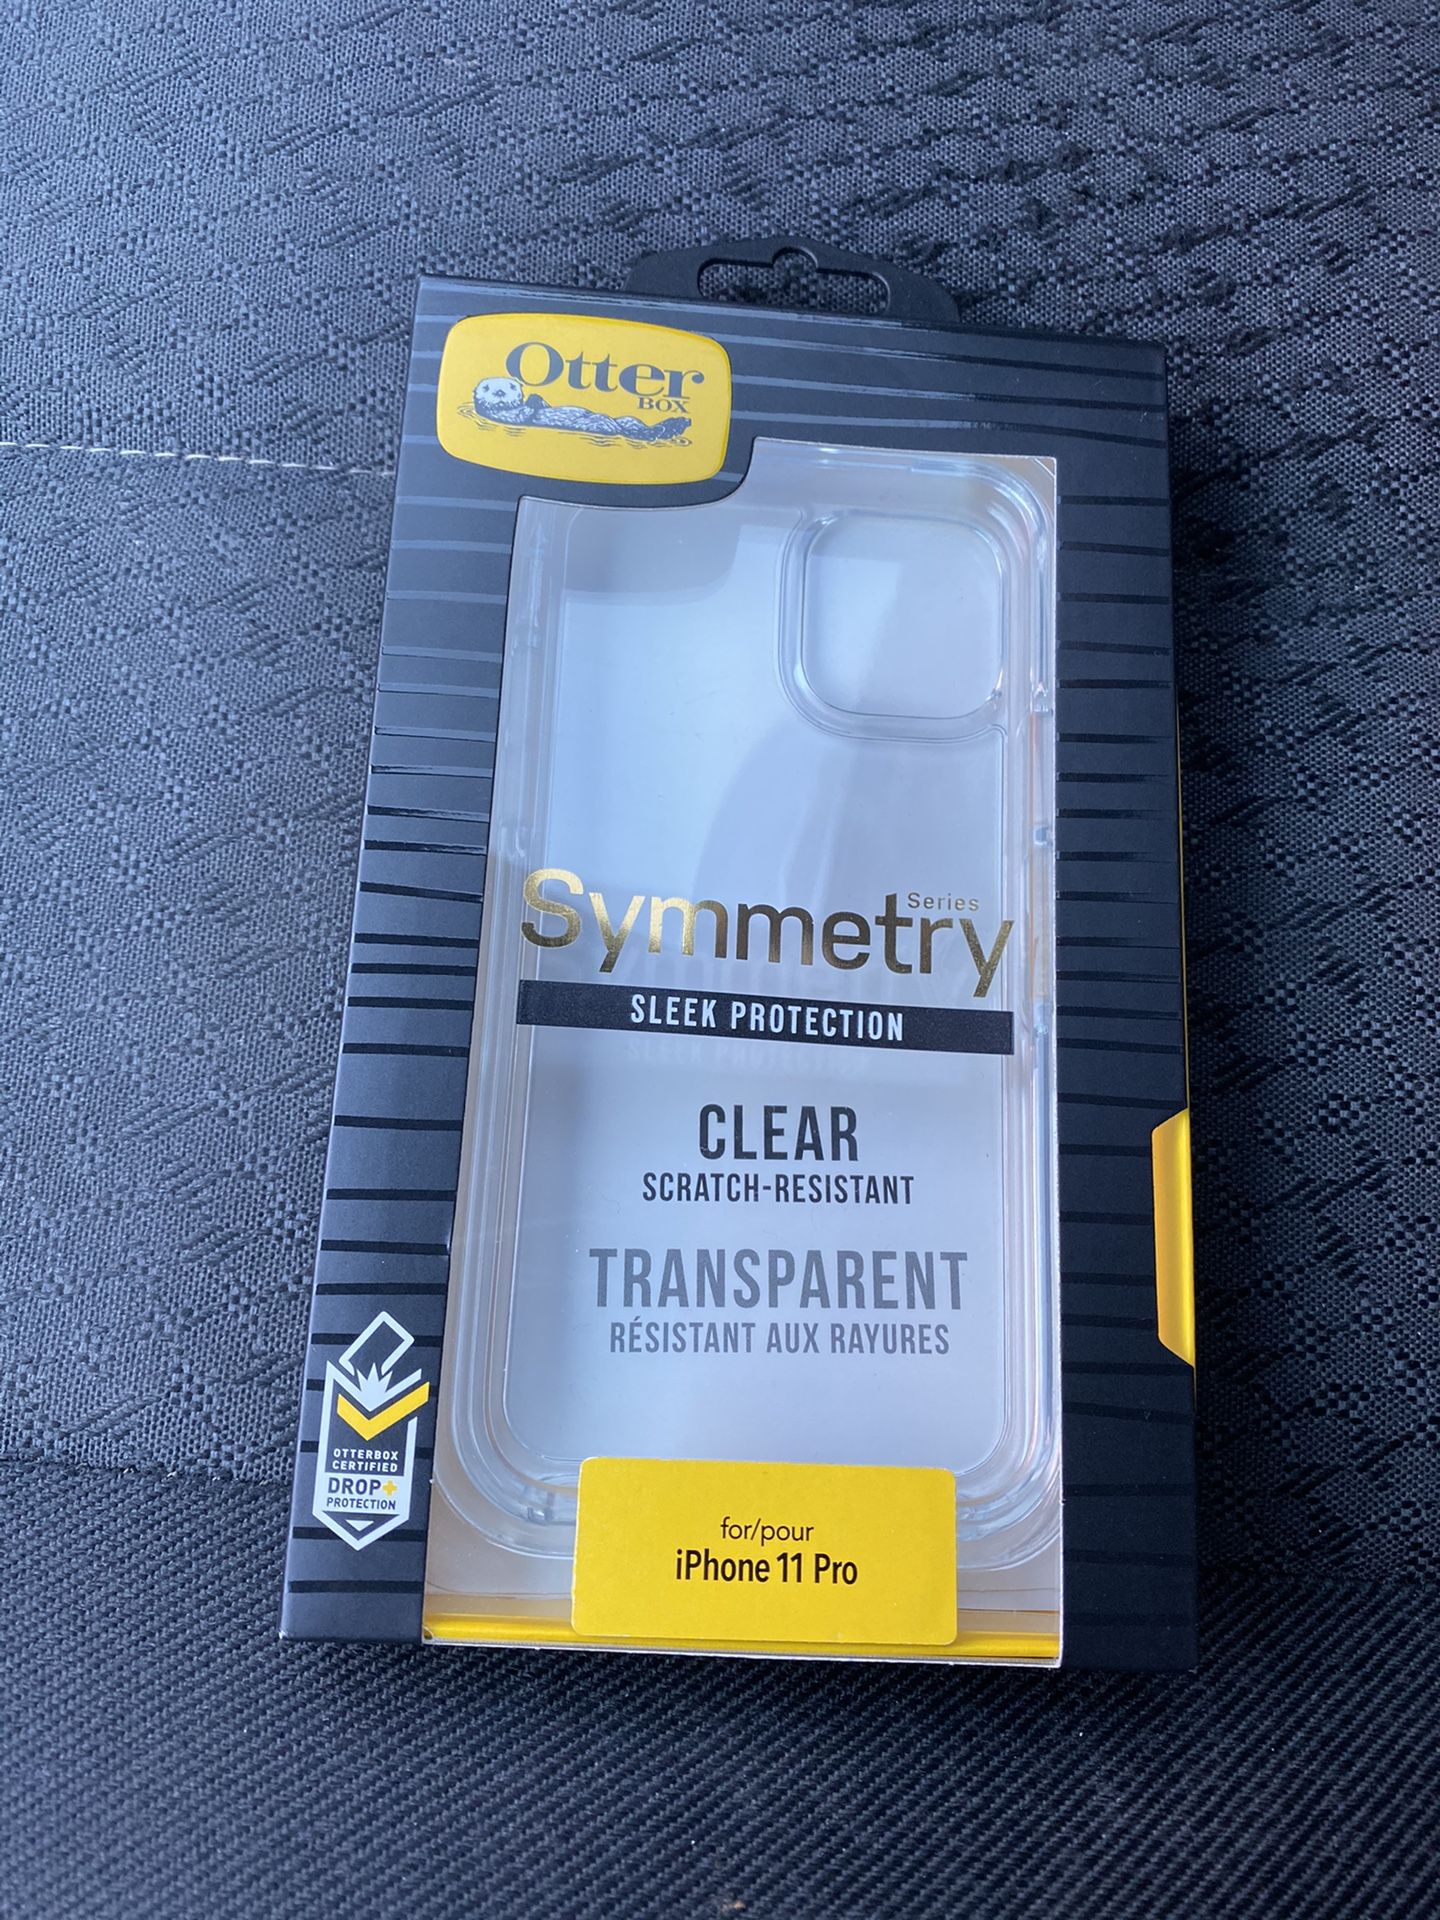 Otter Box Symmetry for iPhone11 pro